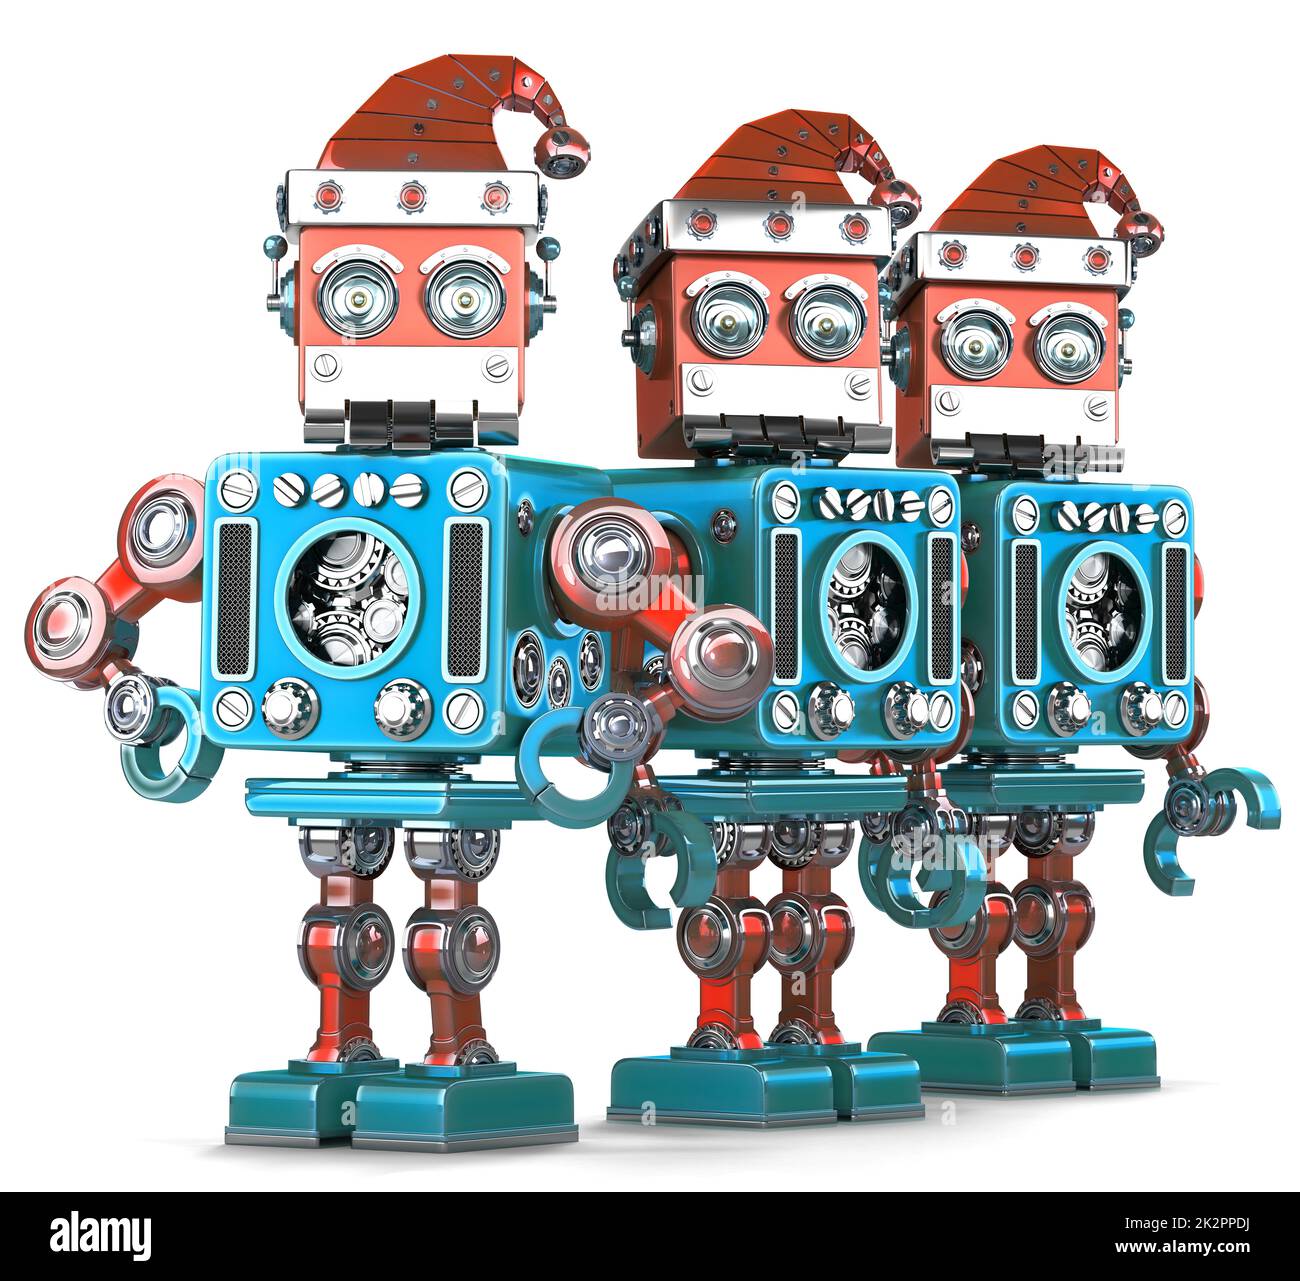 Group of Santa Robots. Christmas concept. Isolated. Contains clipping path Stock Photo